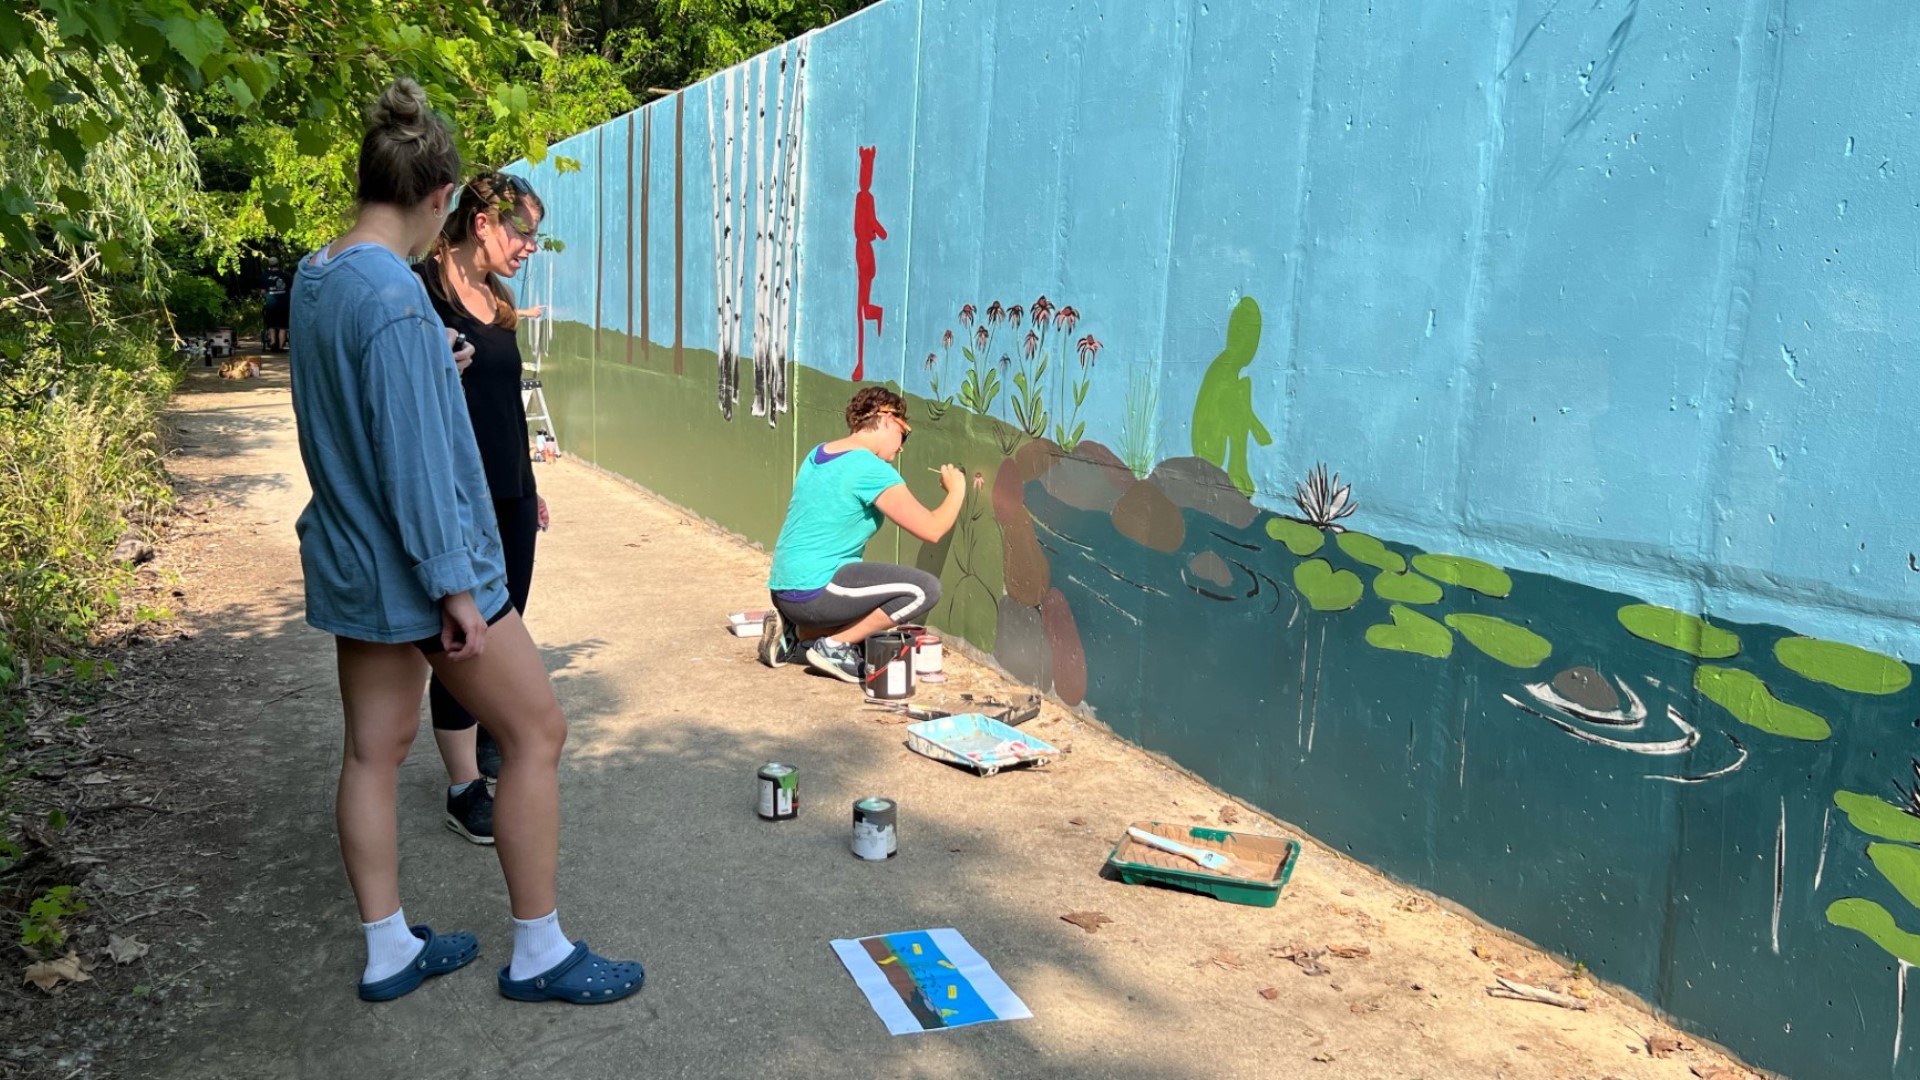 The Plaster Creek has been polluted for years, and the mural is part of a larger effort to raise awareness to keep it clean.